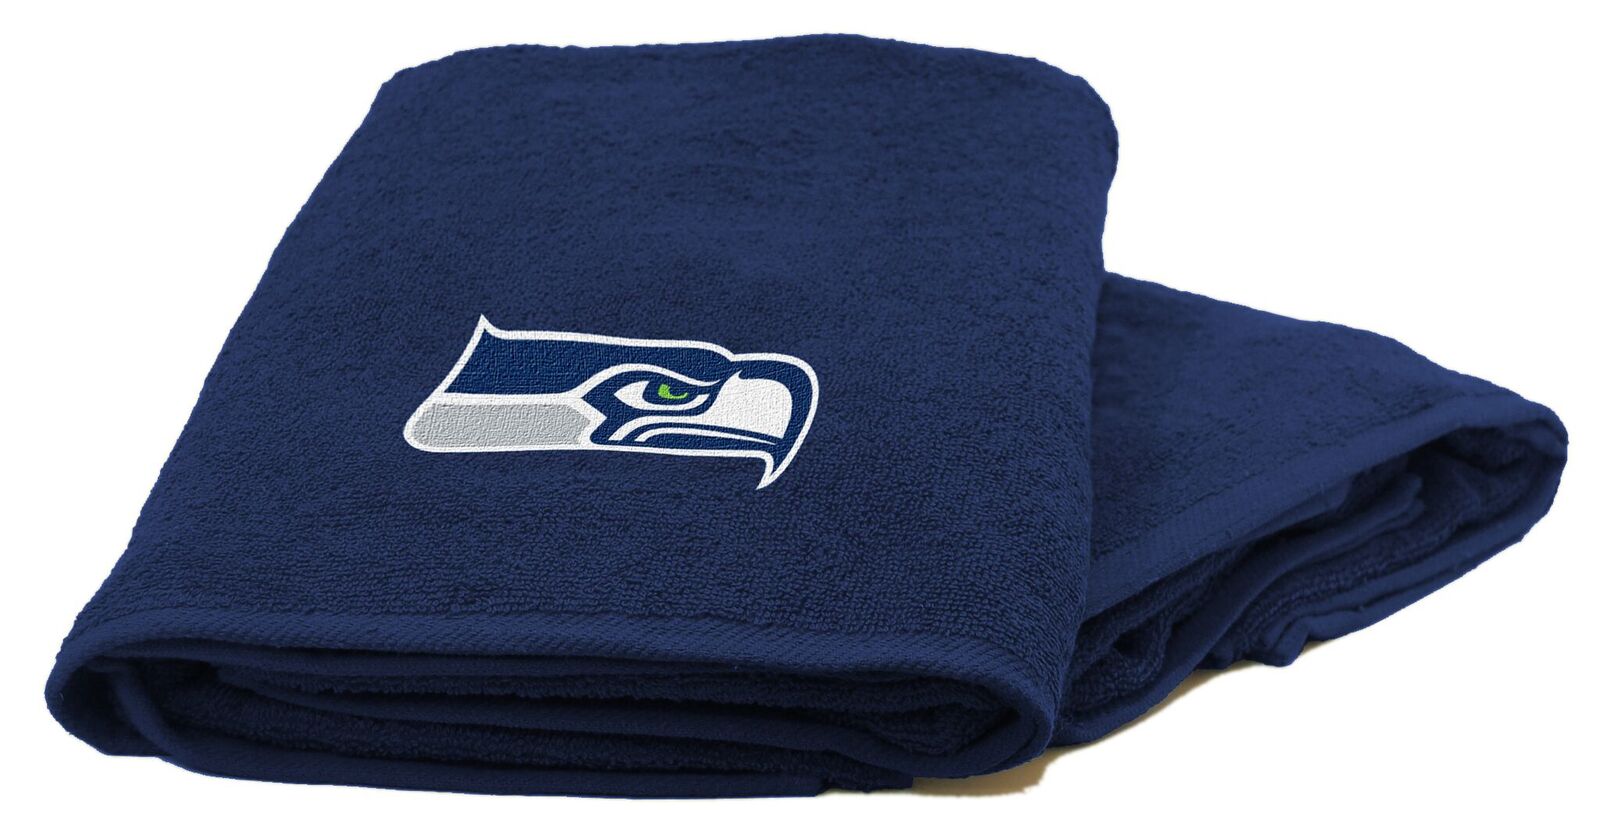 Seattle Seahawks 2-Piece Towel Set, With 26x15 Hand and 25x50 Bath Towel - image 1 of 1